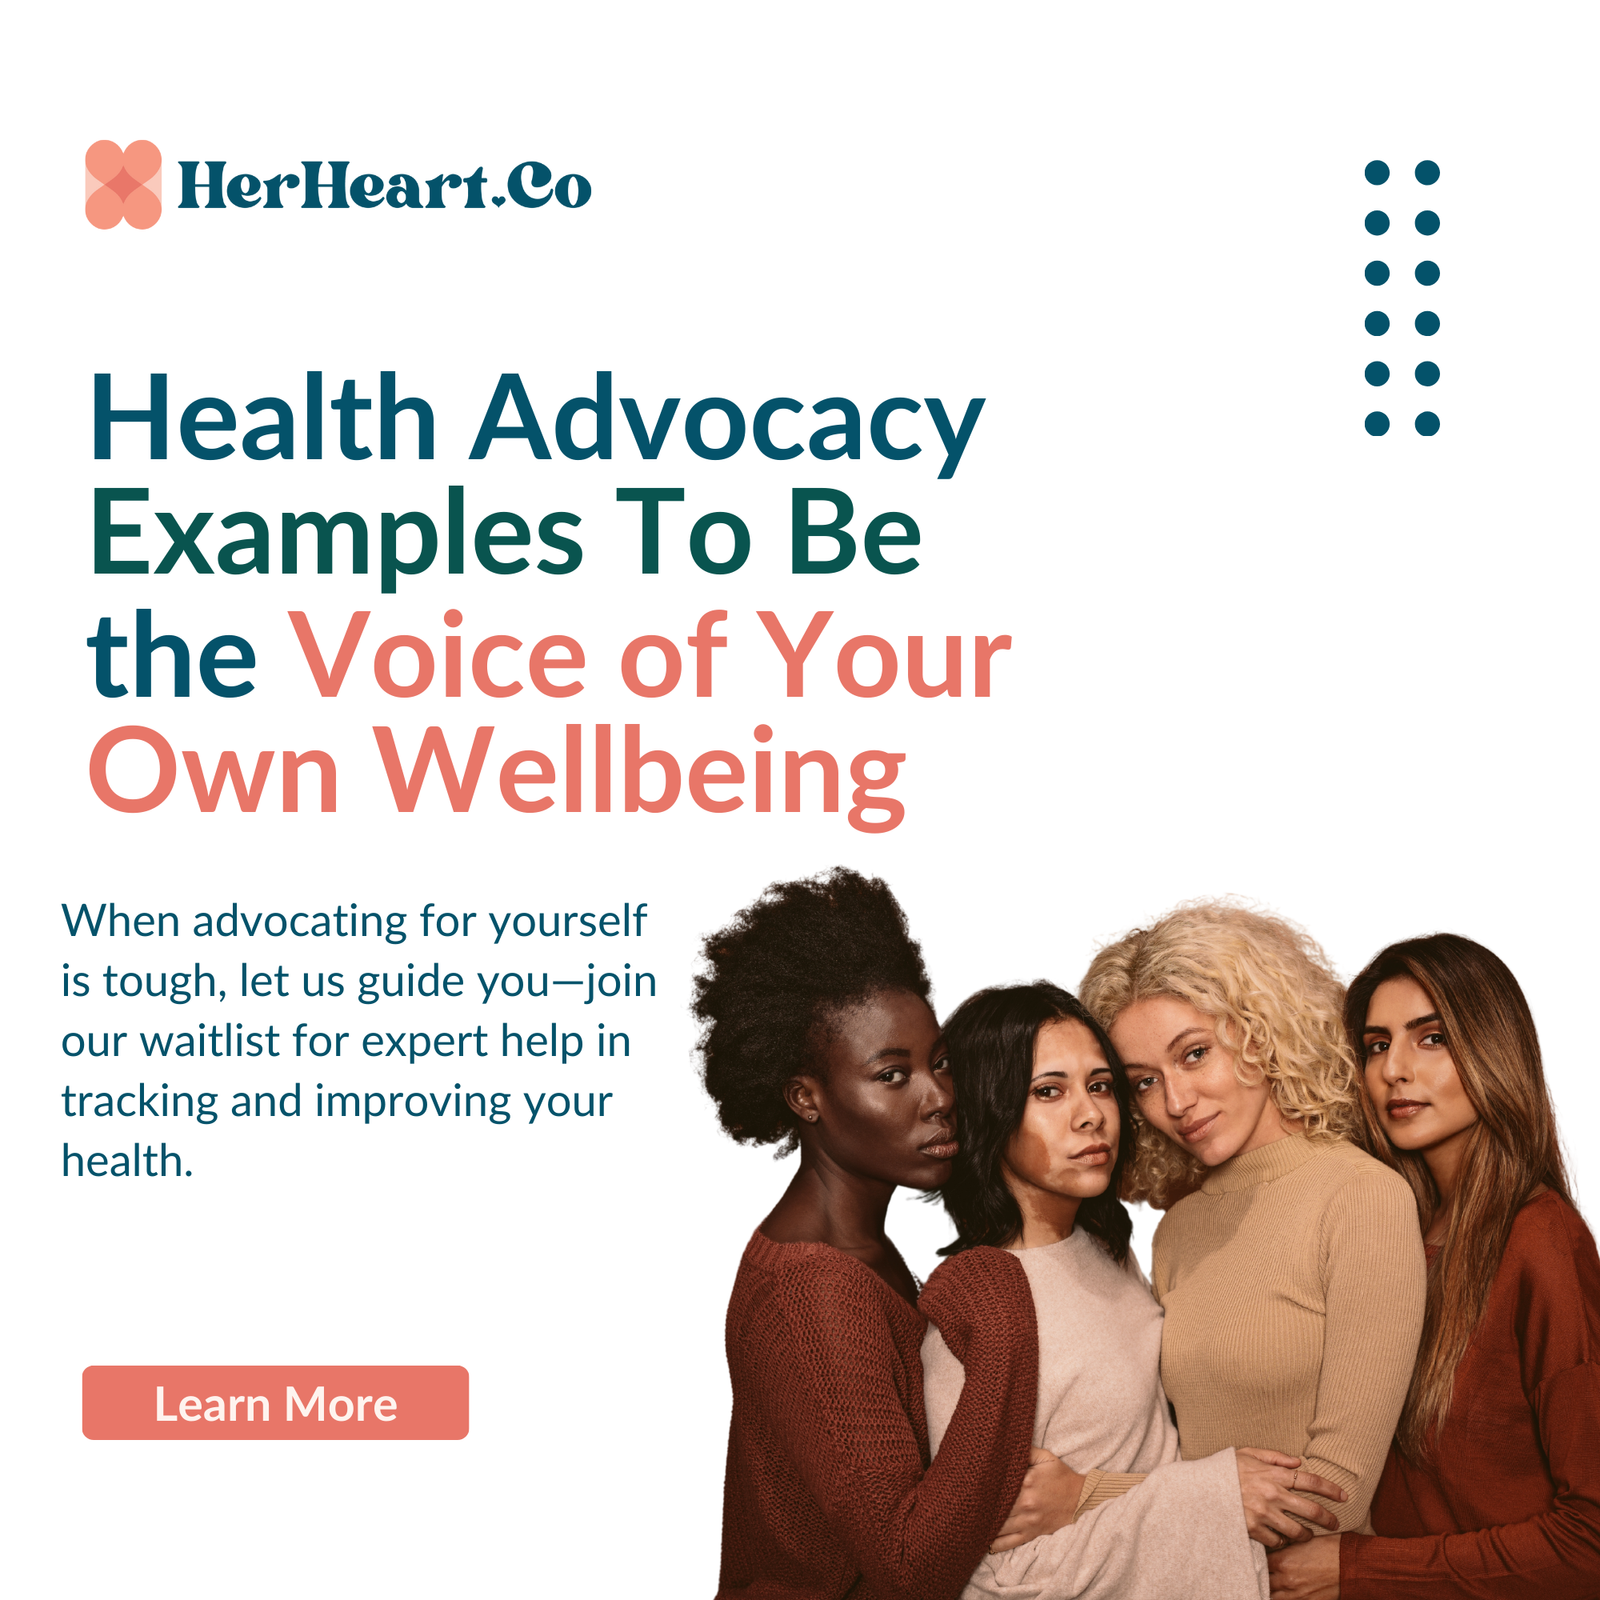 Health Advocacy Examples To Be the Voice of Your Own Wellbeing